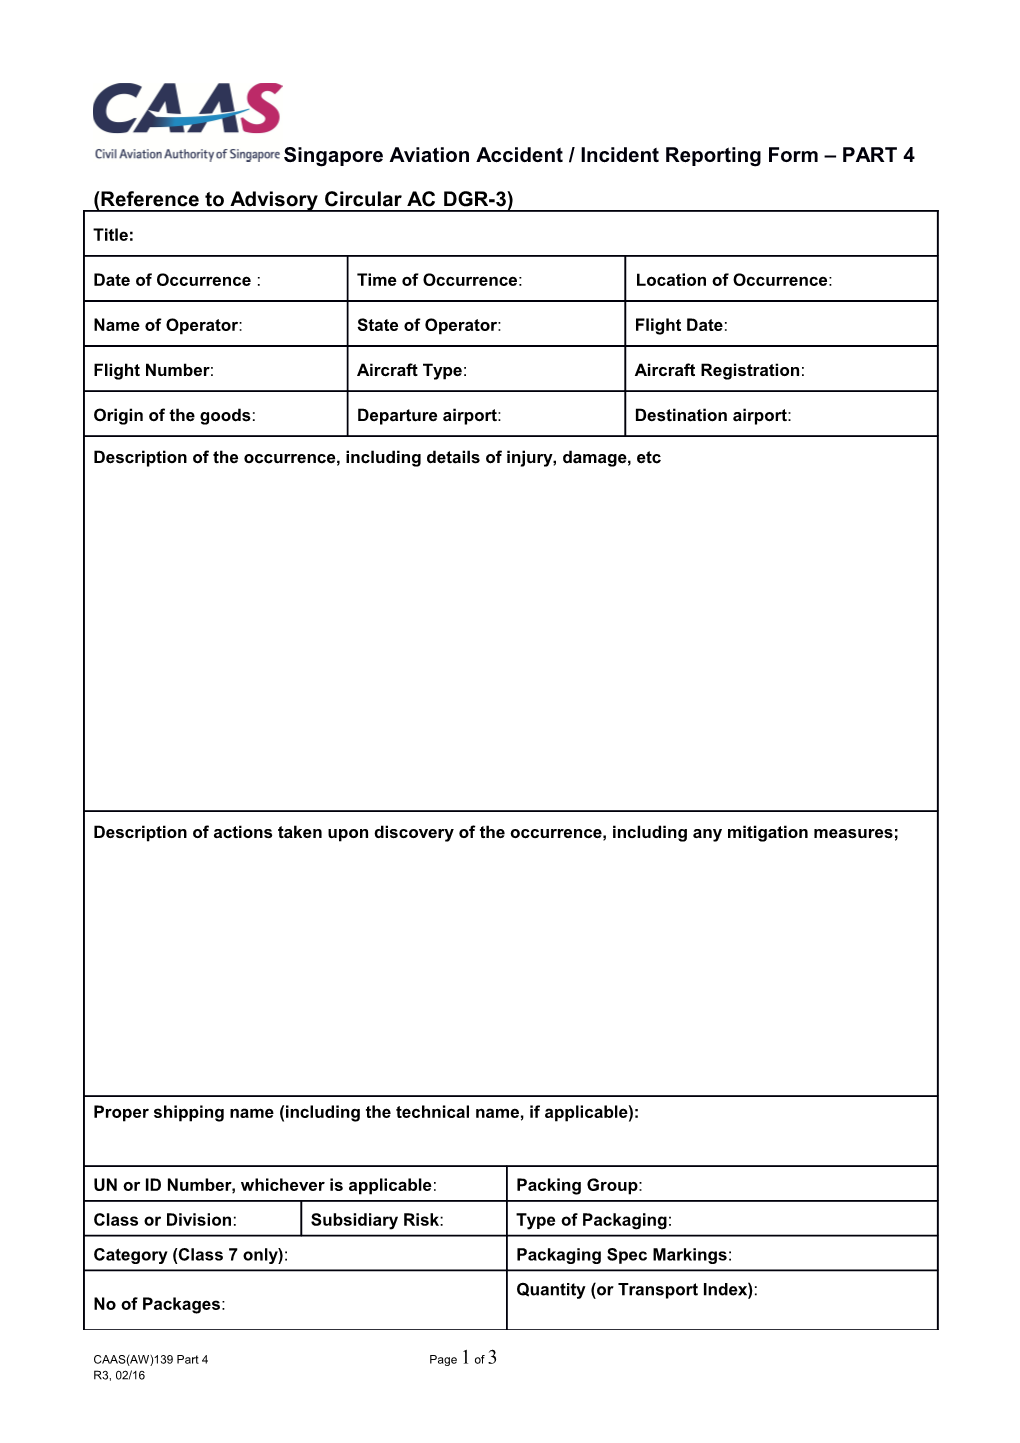 Singapore Aviation Accident / Incident Reporting Form PART 4